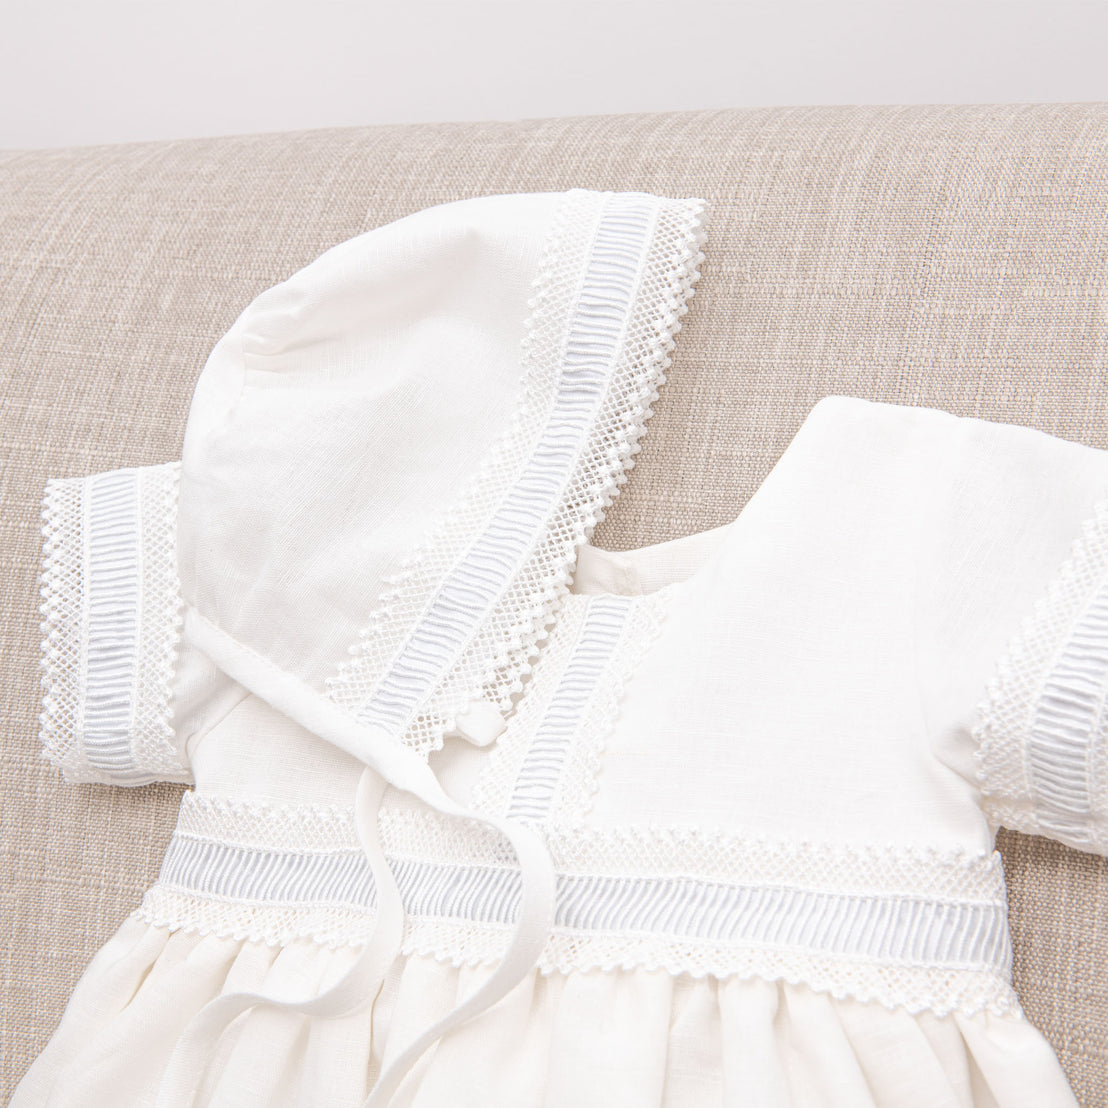 Photograph of the boys bonnet and baptism gown.